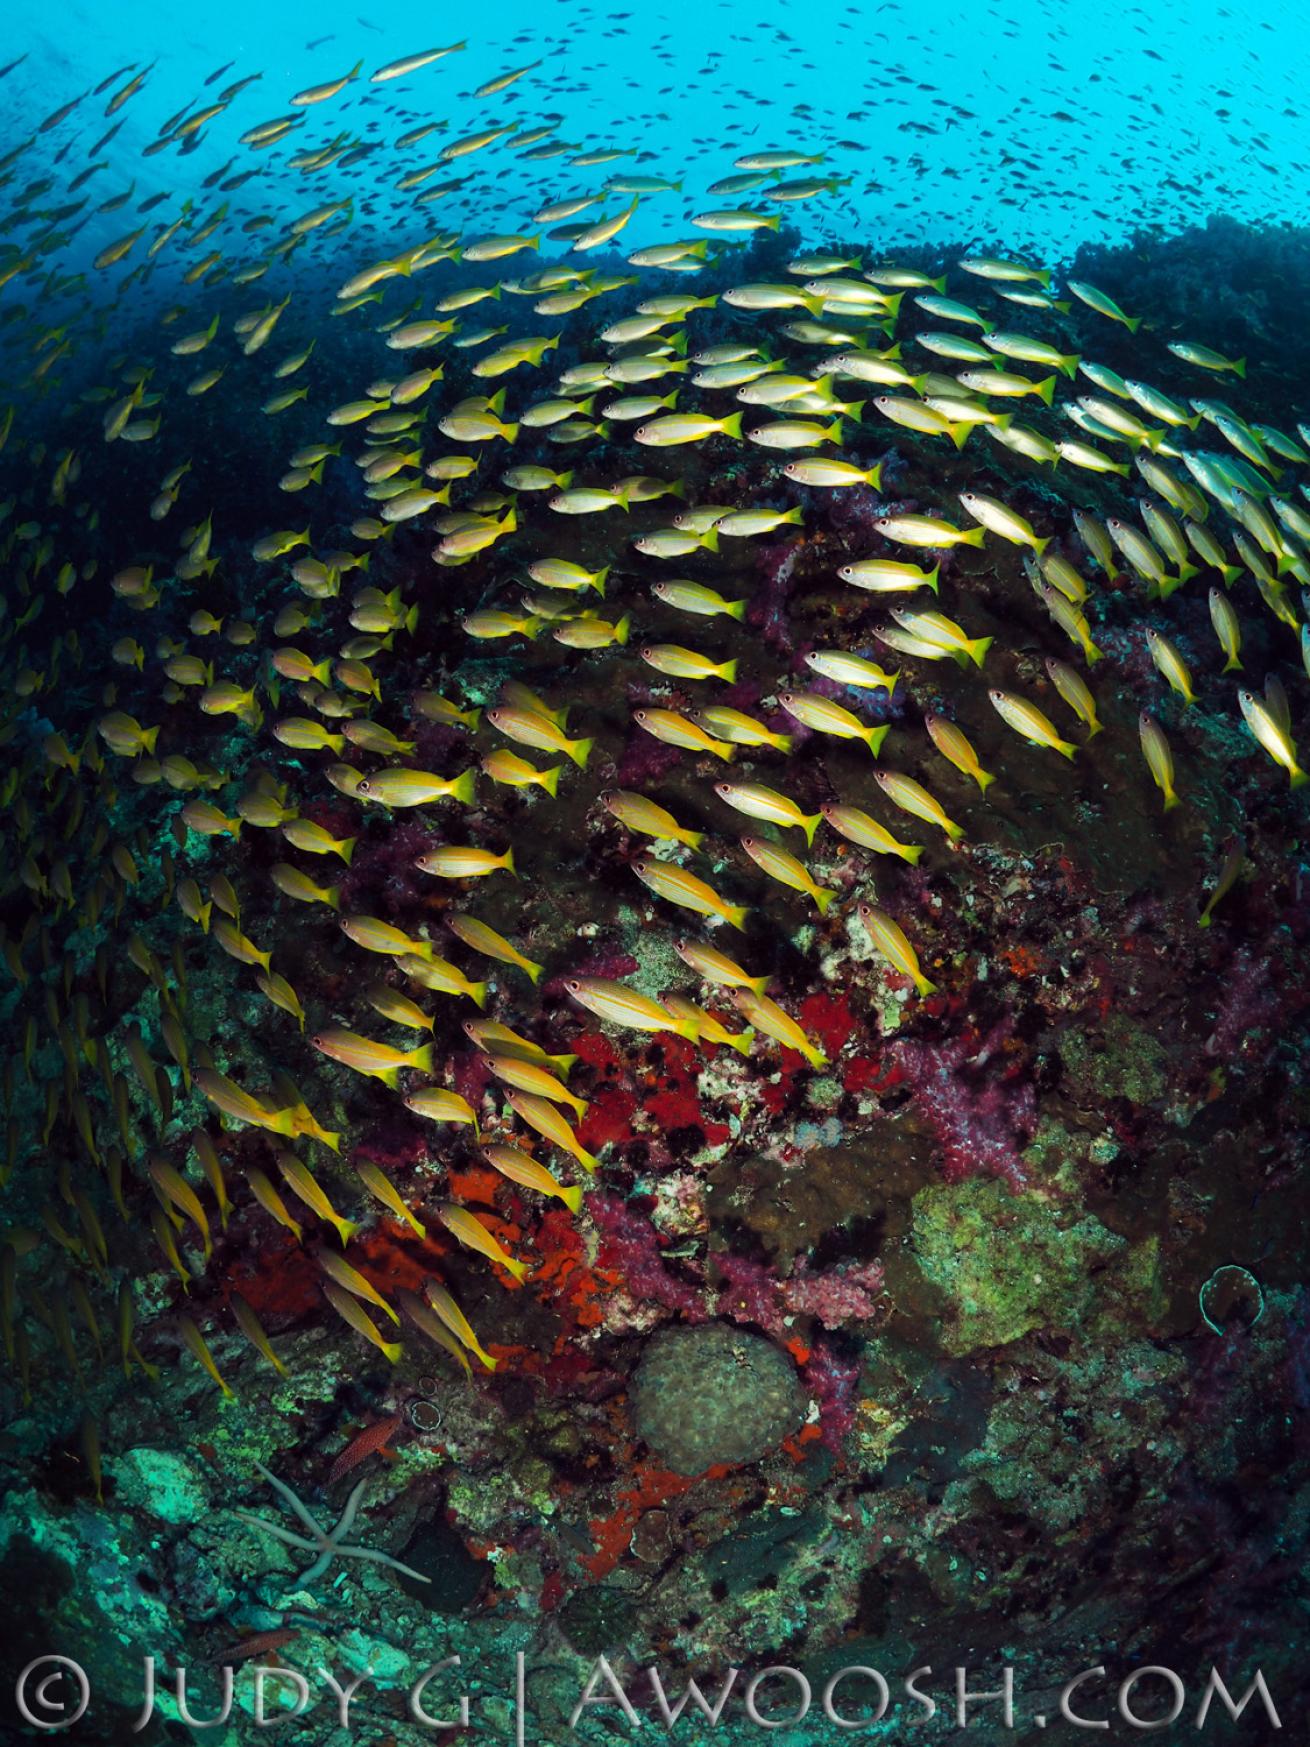 Schooling fusiliers fish in Richelieu Rock, Thailand underwater photography